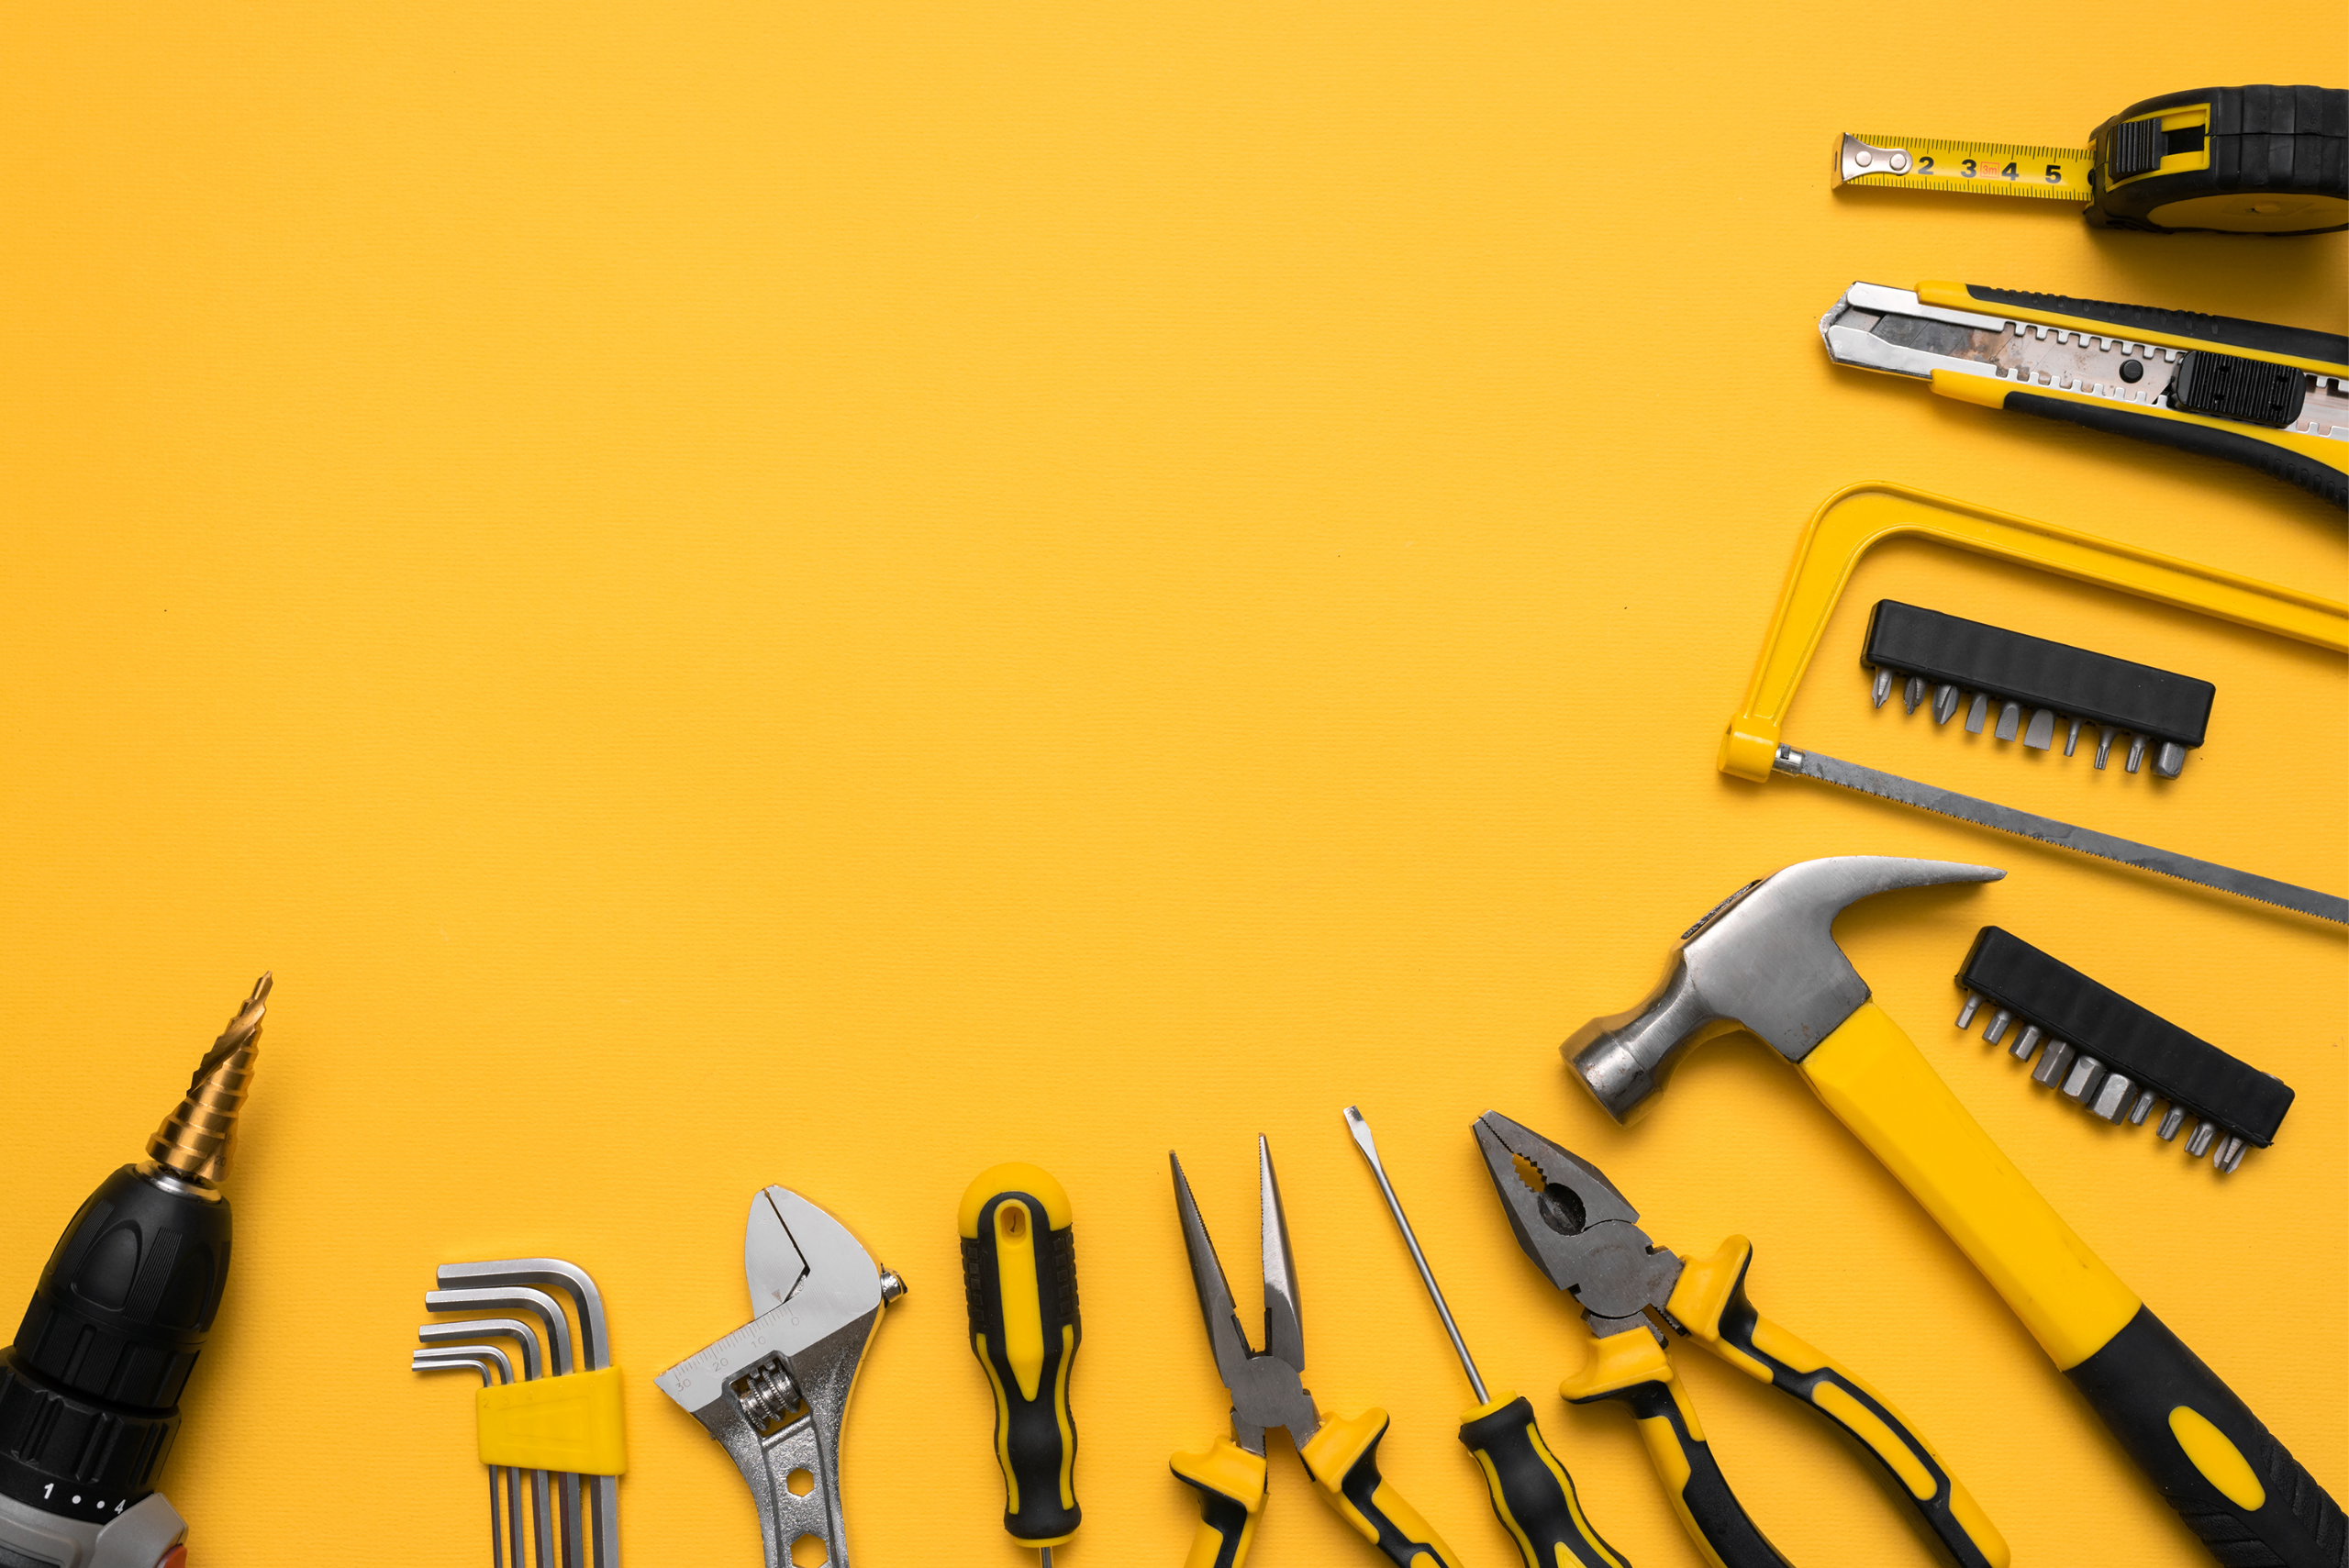 Selection of tools on a yellow background.